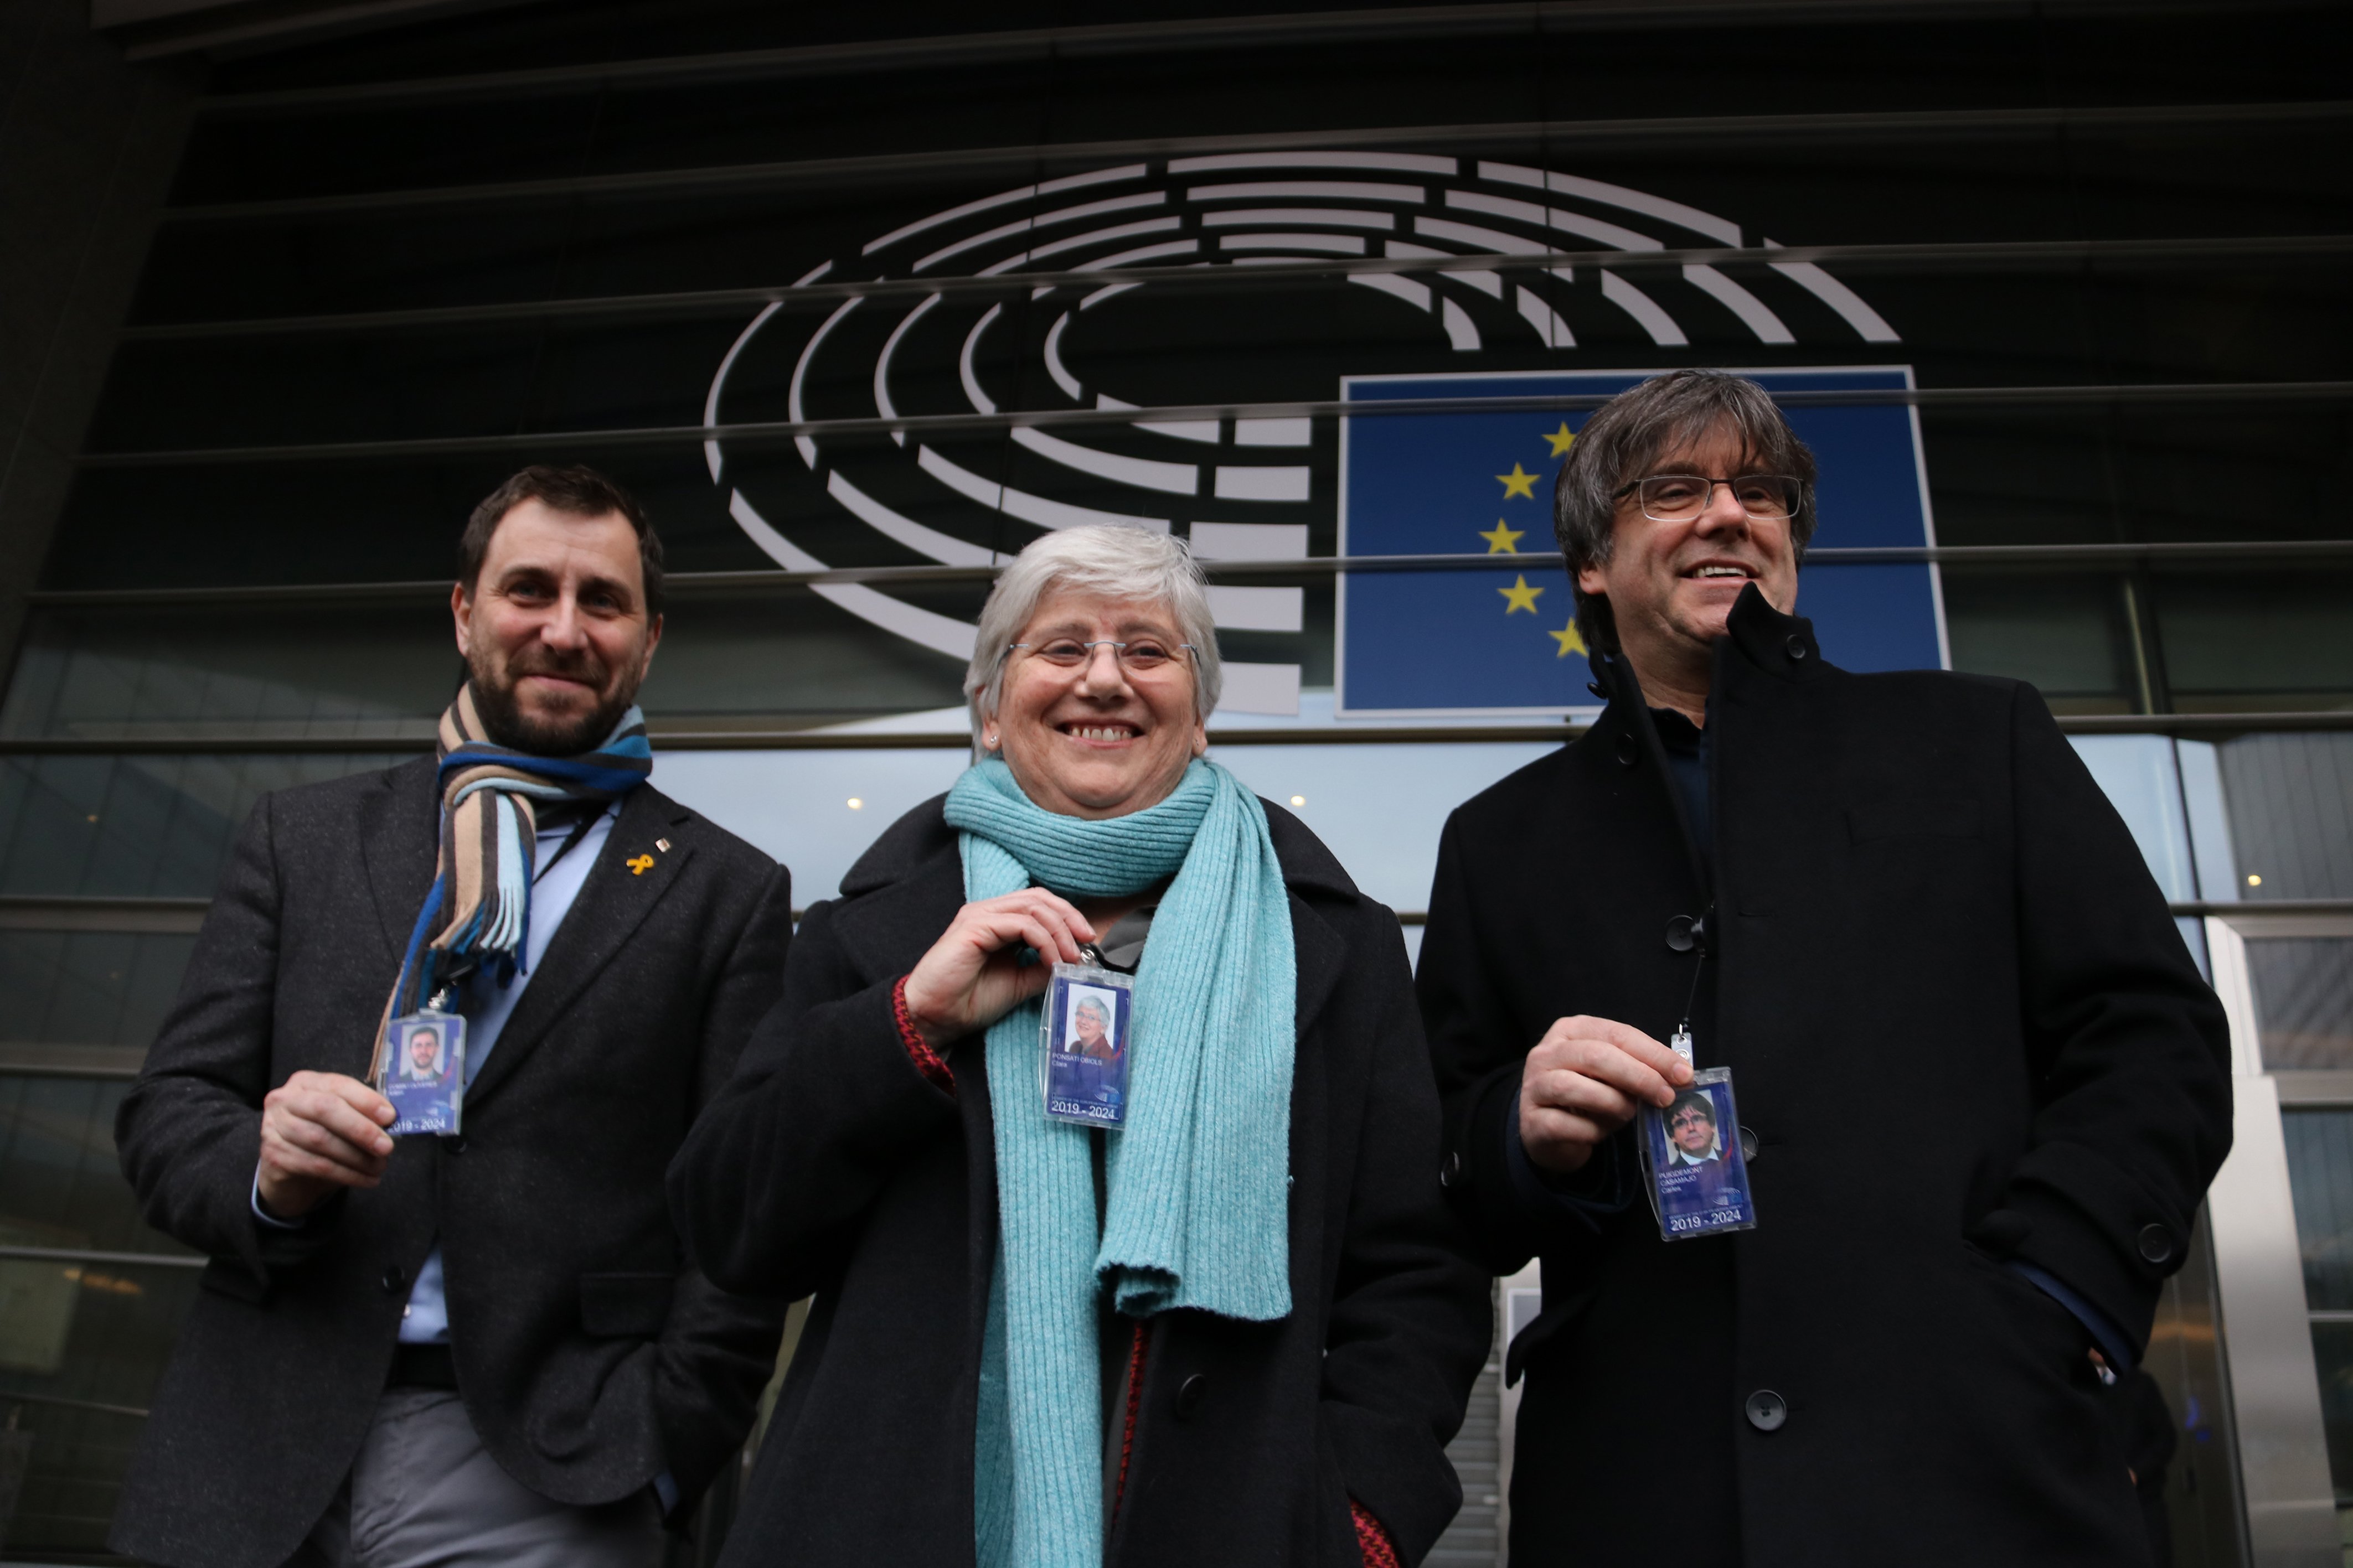 New MEP Clara Ponsatí picks up her parliamentary accreditation in Brussels